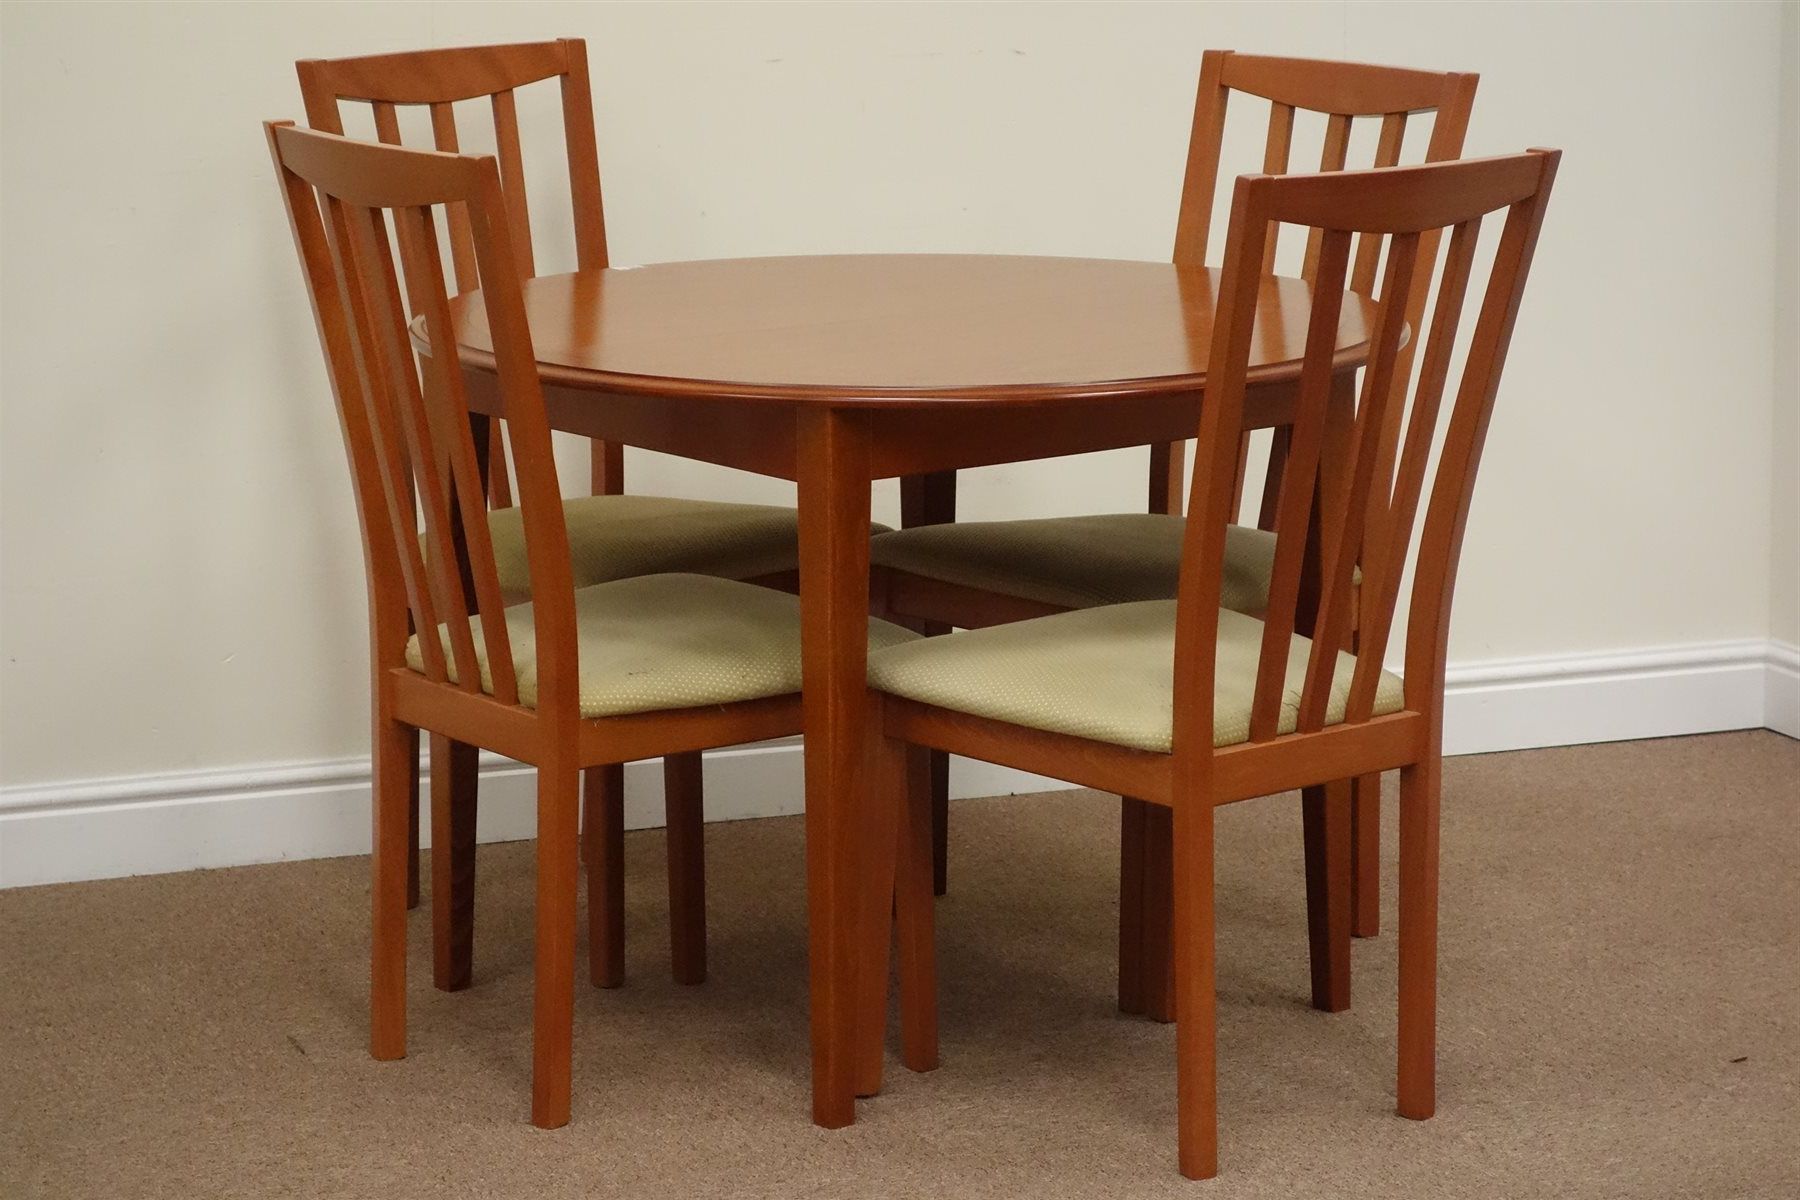 Morris Circular Cherry Wood Extending Dining Table With Fold Regarding Popular Morris Round Dining Tables (View 10 of 25)